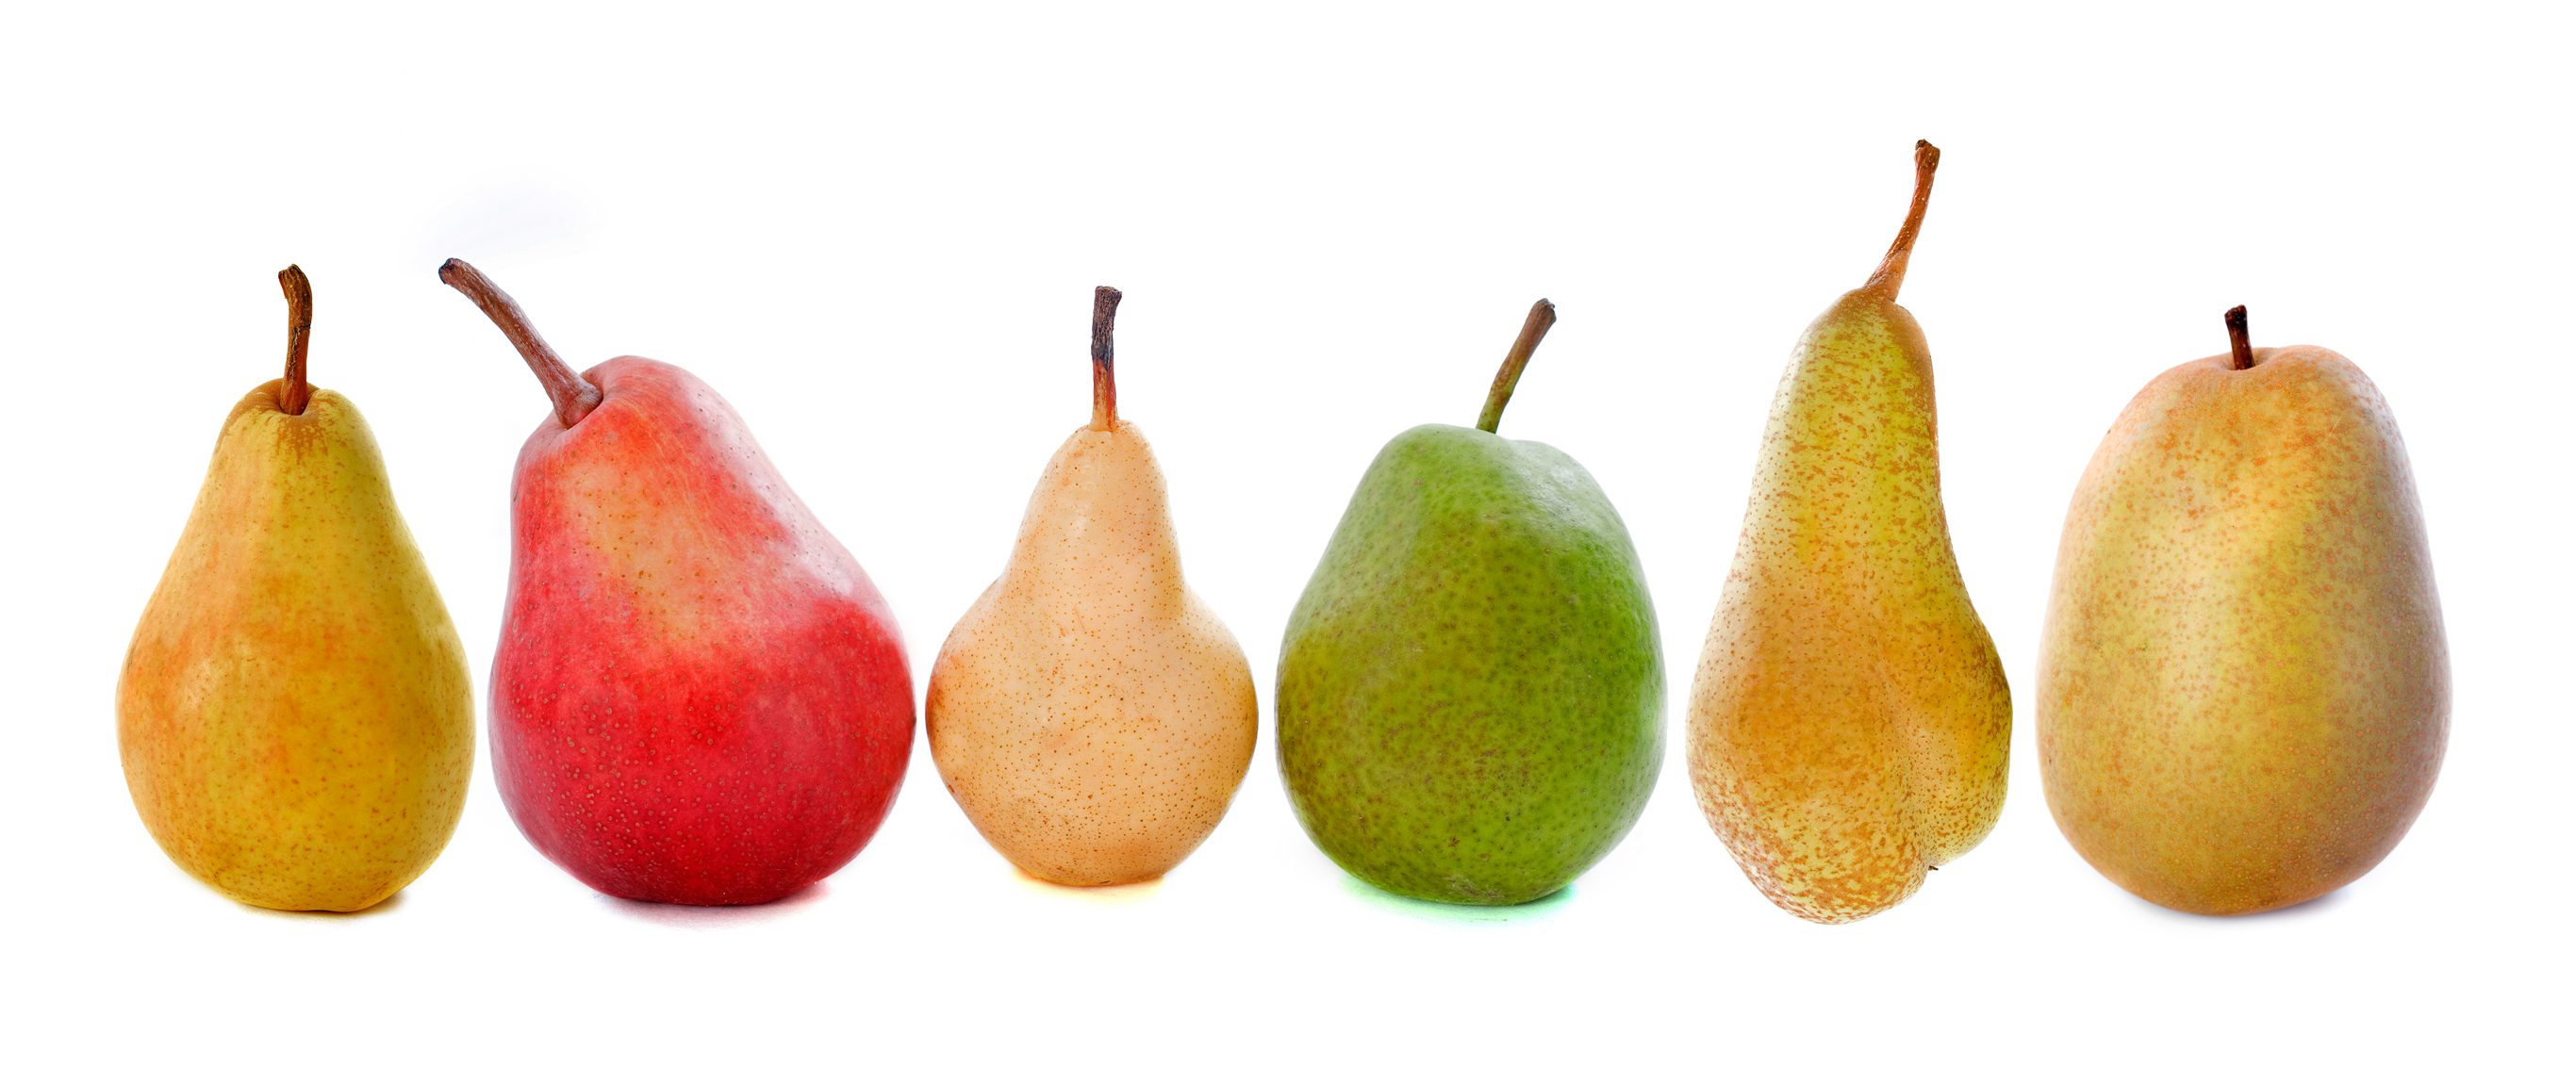 kinds of pears